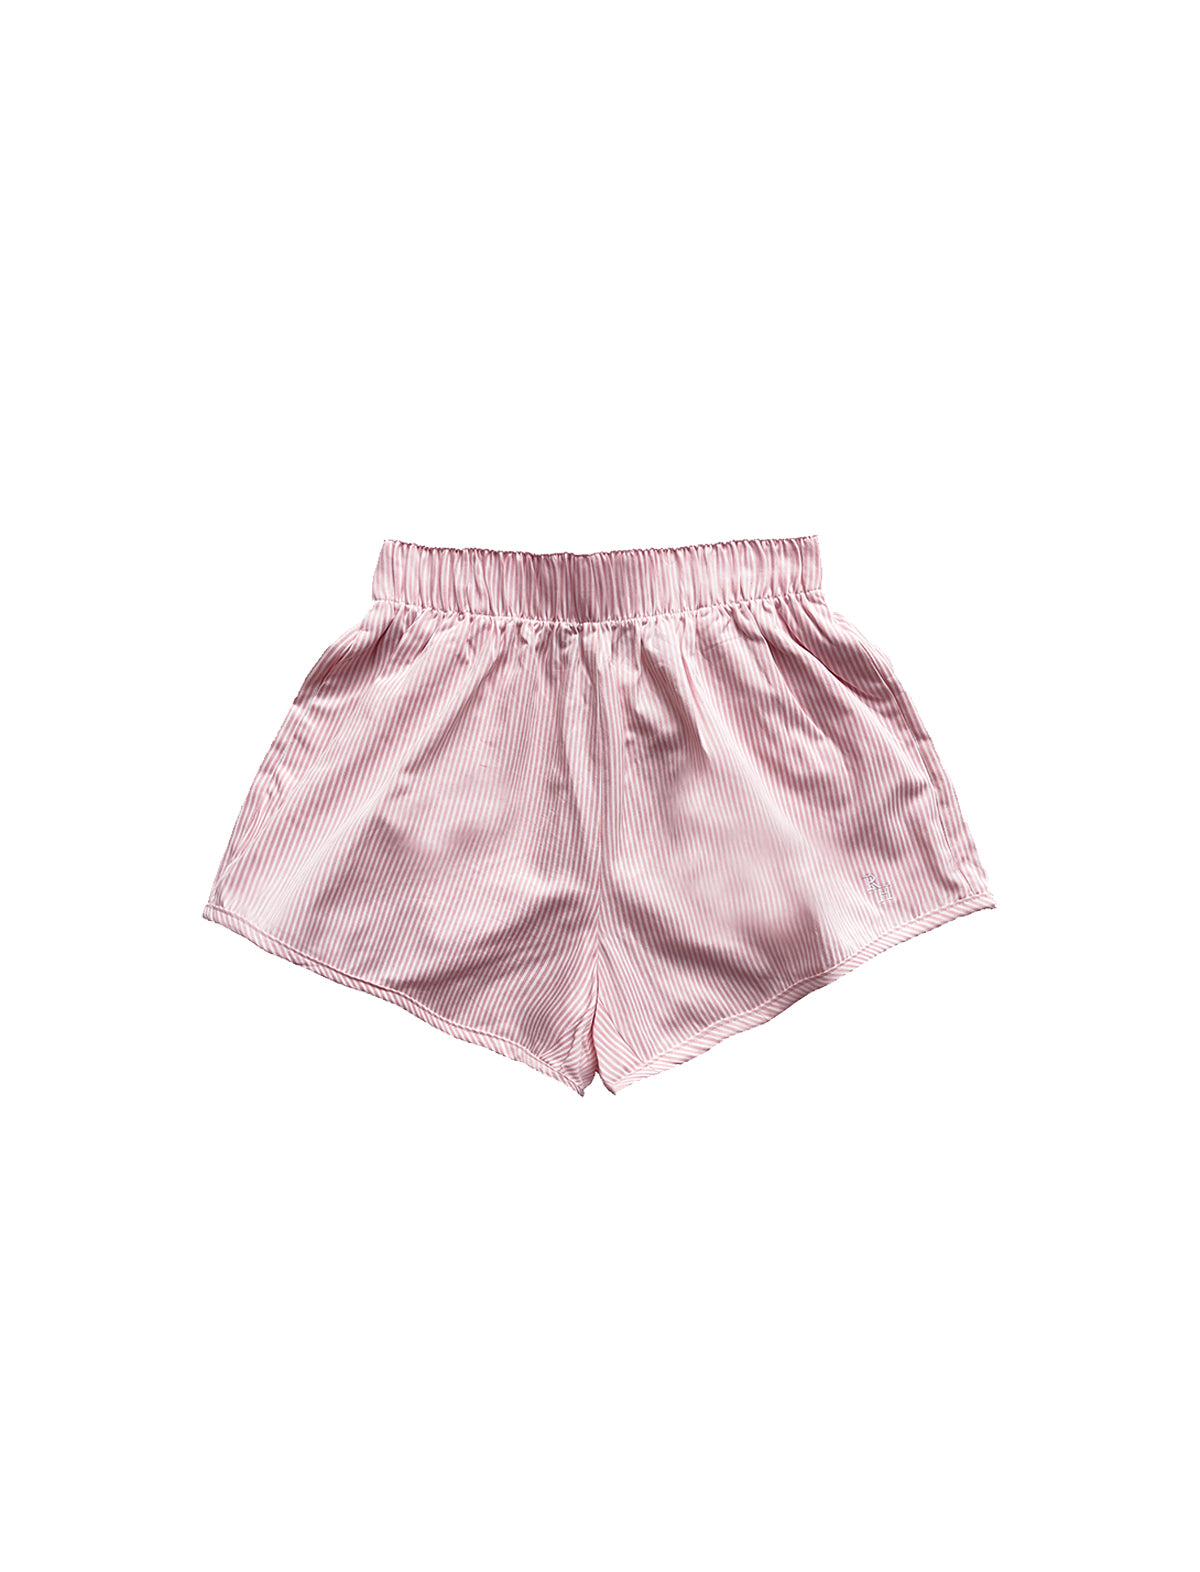 RECREATIONAL HABITS Ferry Short in Pink